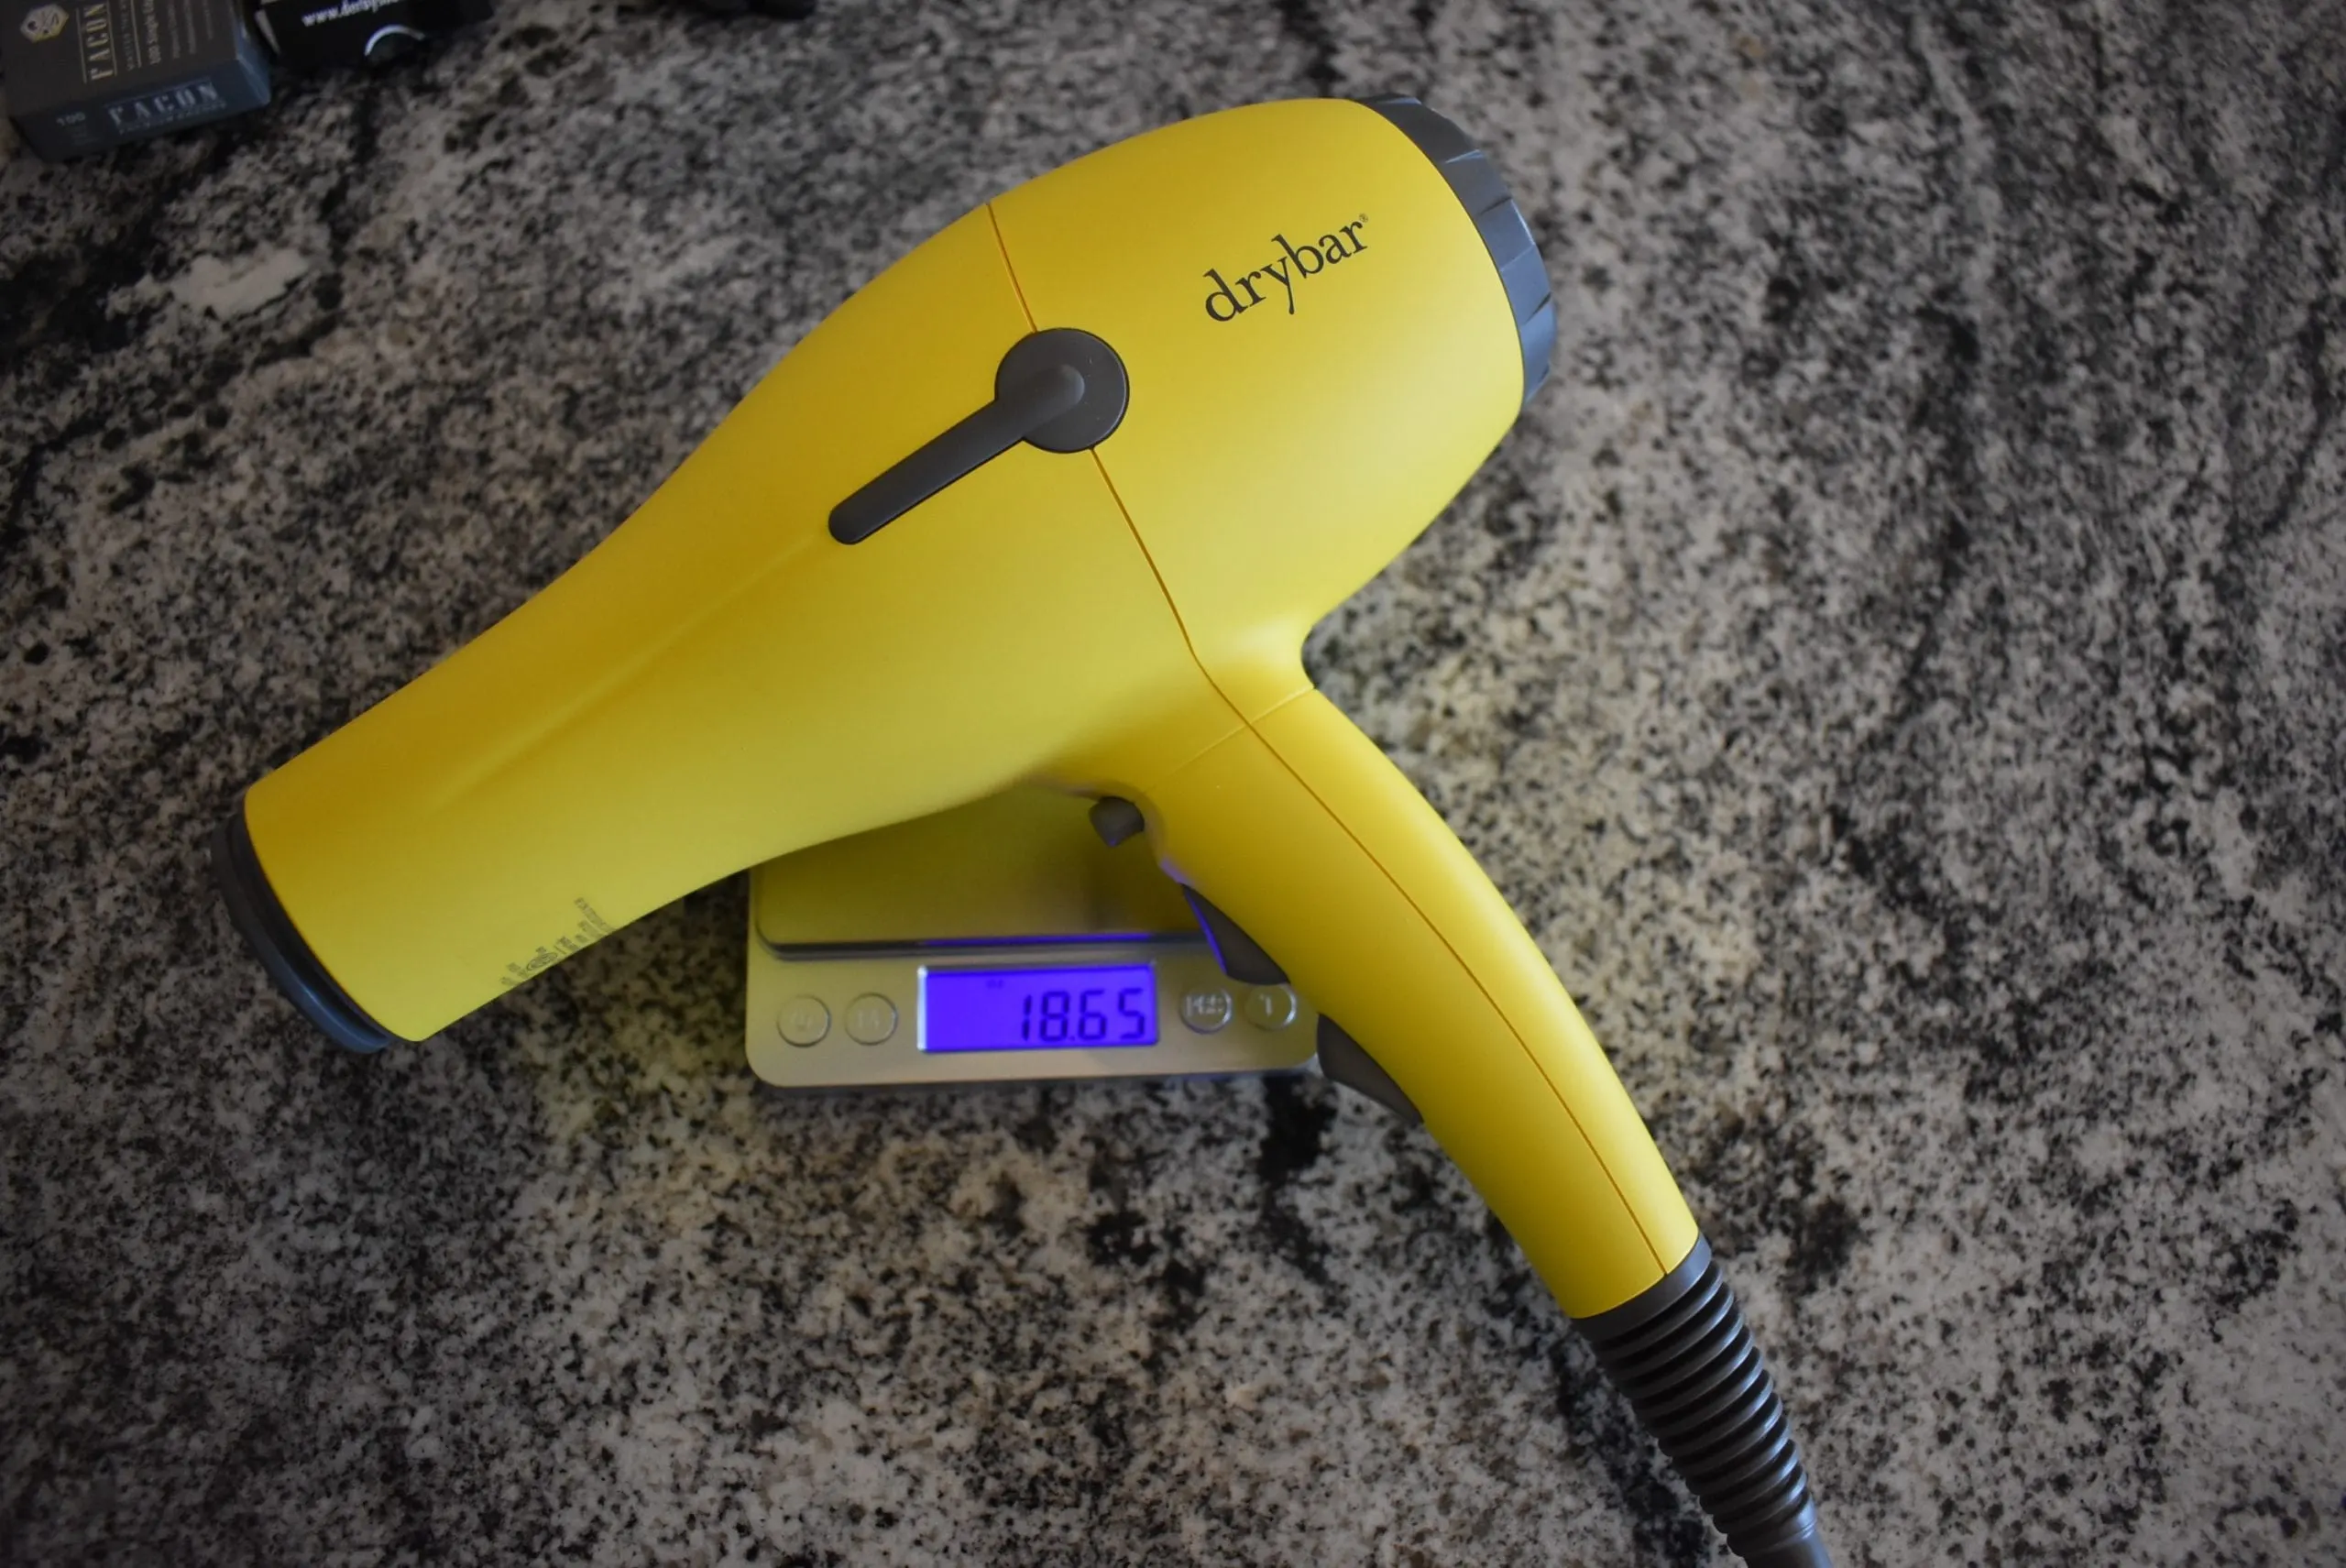 The Drybar Buttercup, one of the top hair dryers, on an oz kitchen scale